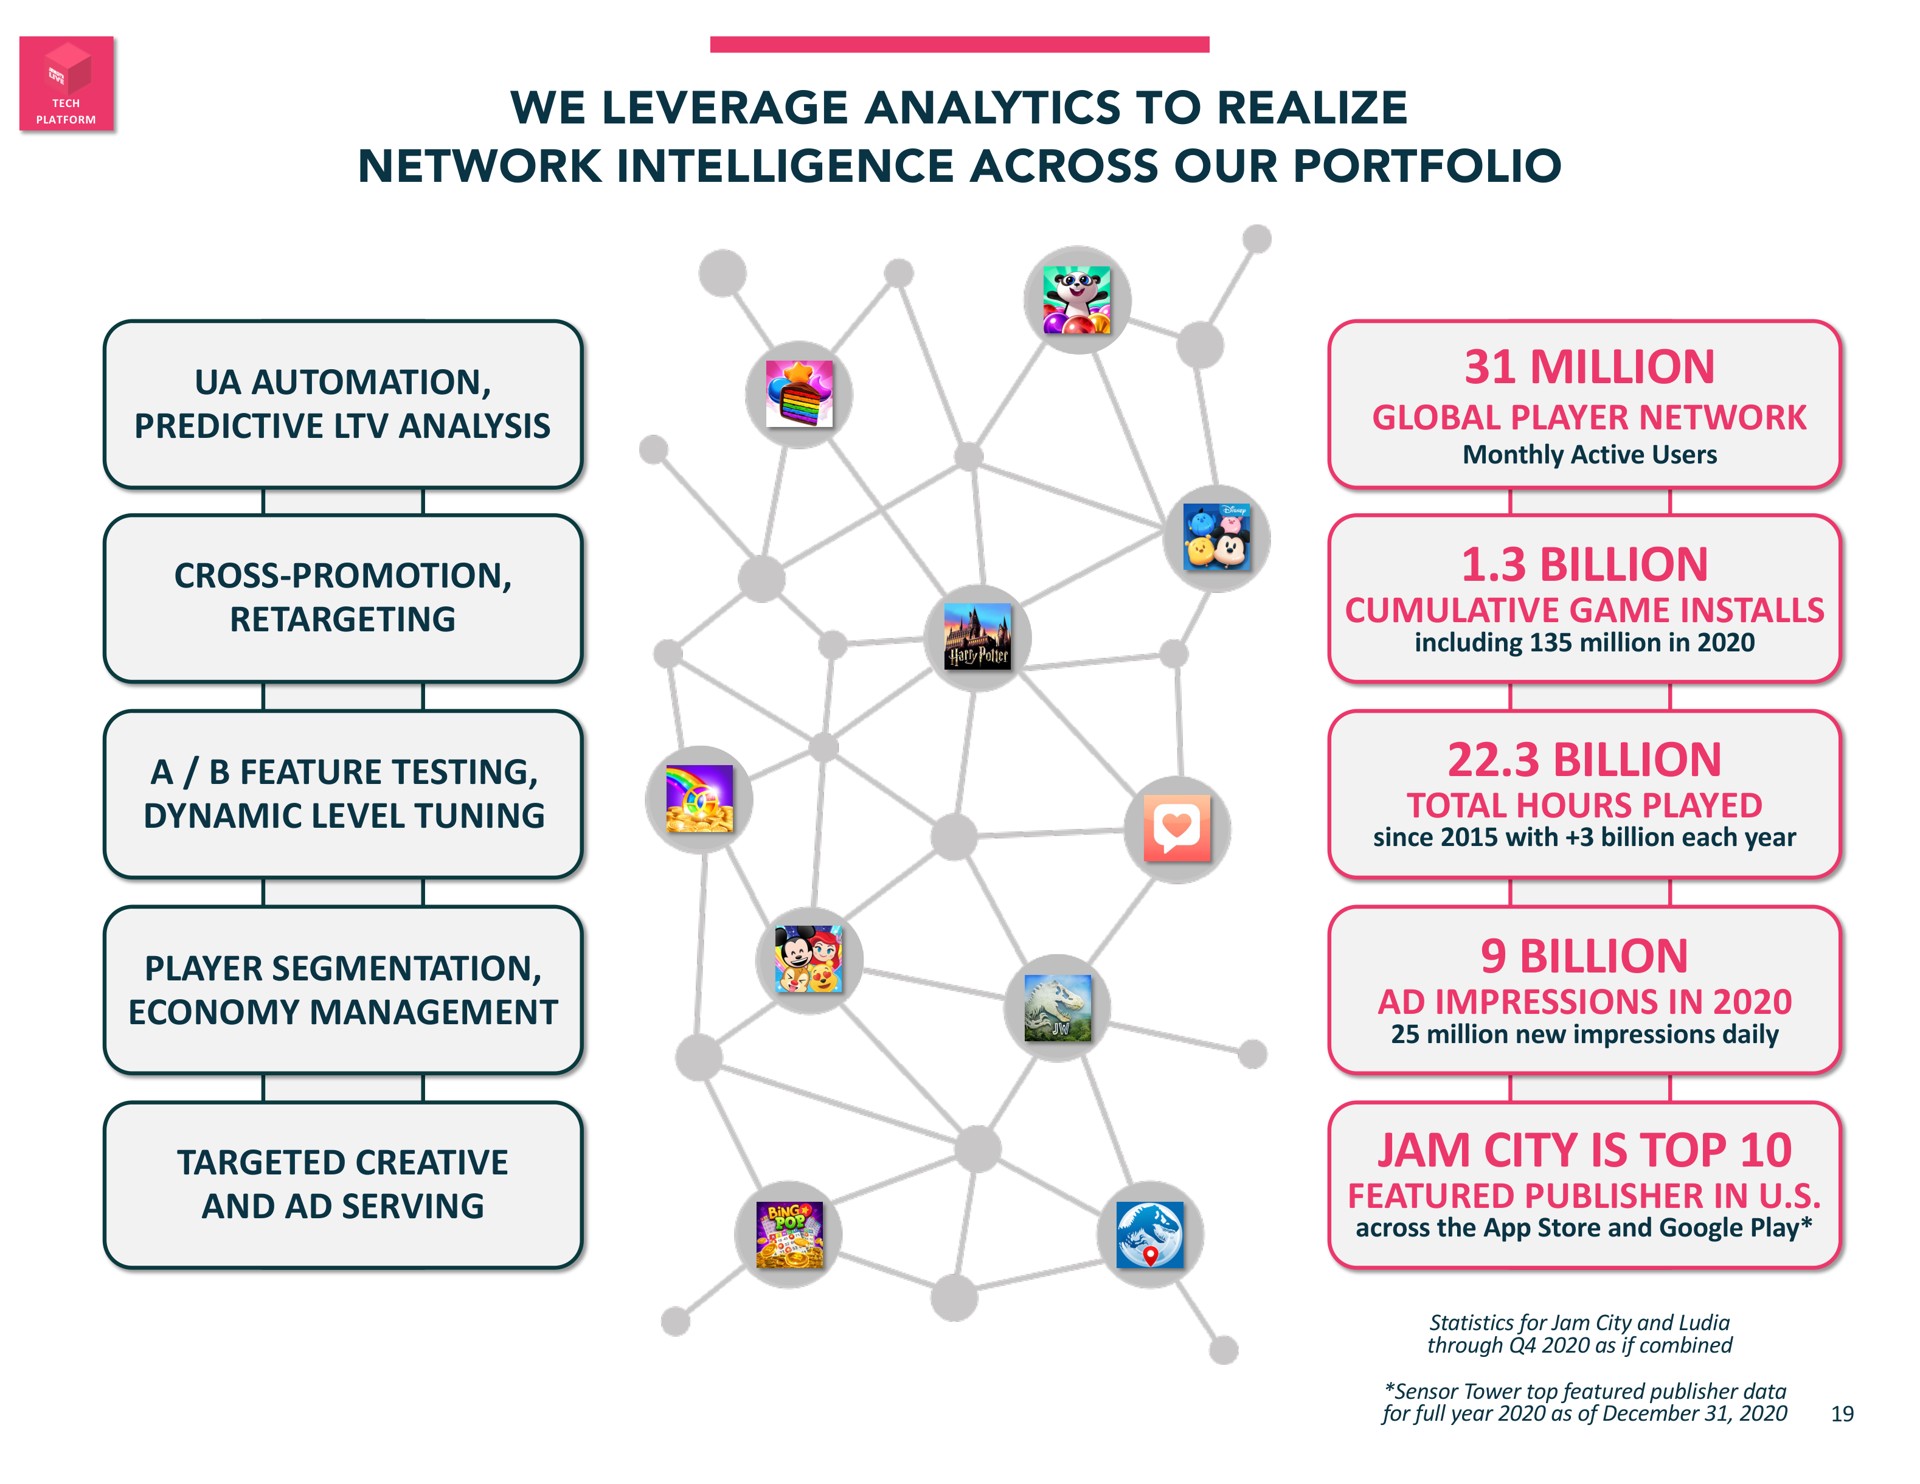 we leverage analytics to realize network intelligence across our portfolio predictive analysis cross promotion a feature testing dynamic level tuning player segmentation economy management targeted creative and serving million global player network monthly active users billion cumulative game installs including million in billion total hours played since with billion each year billion impressions in million new impressions daily jam city is top featured publisher in across the store and play statistics for jam city and through as if combined sensor tower top featured publisher data for full year as of | Jam City